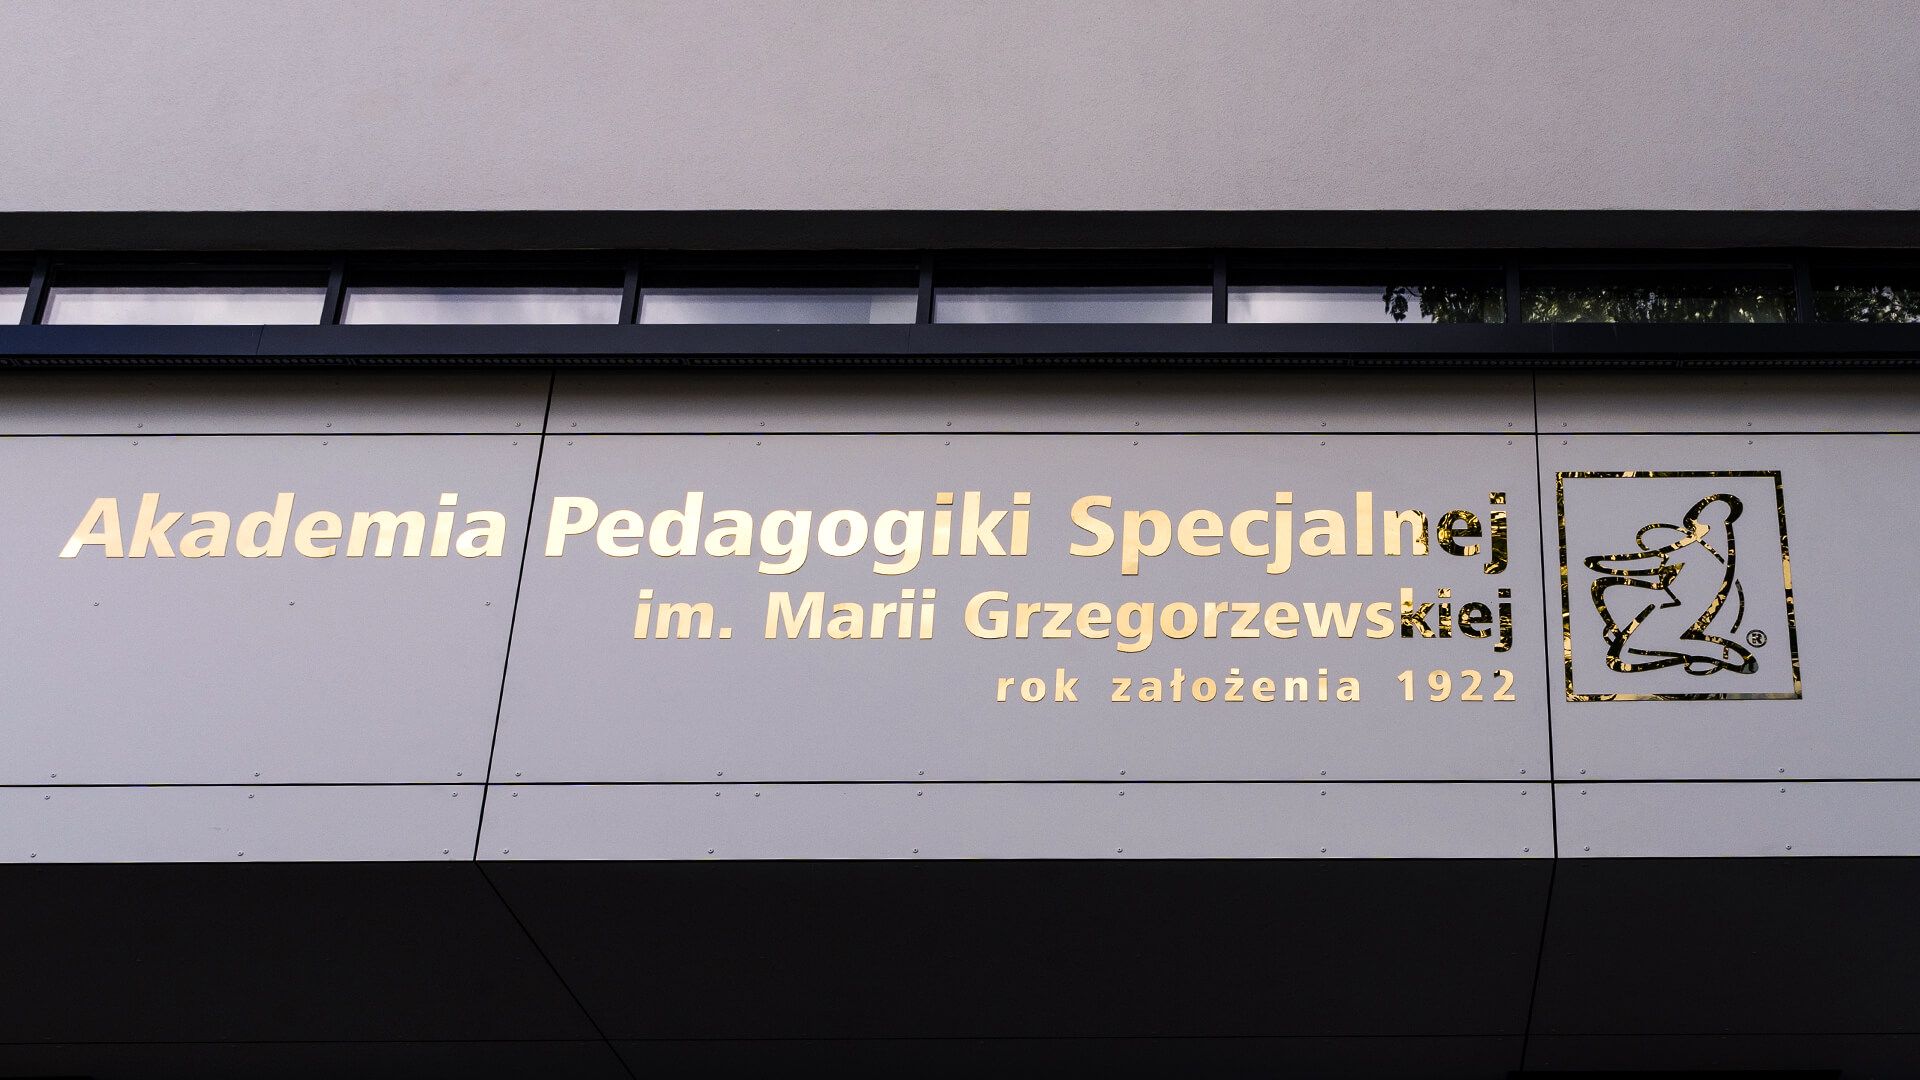 Academy of Special Education - Metal letters - Gold stainless steel letters above the entrance.